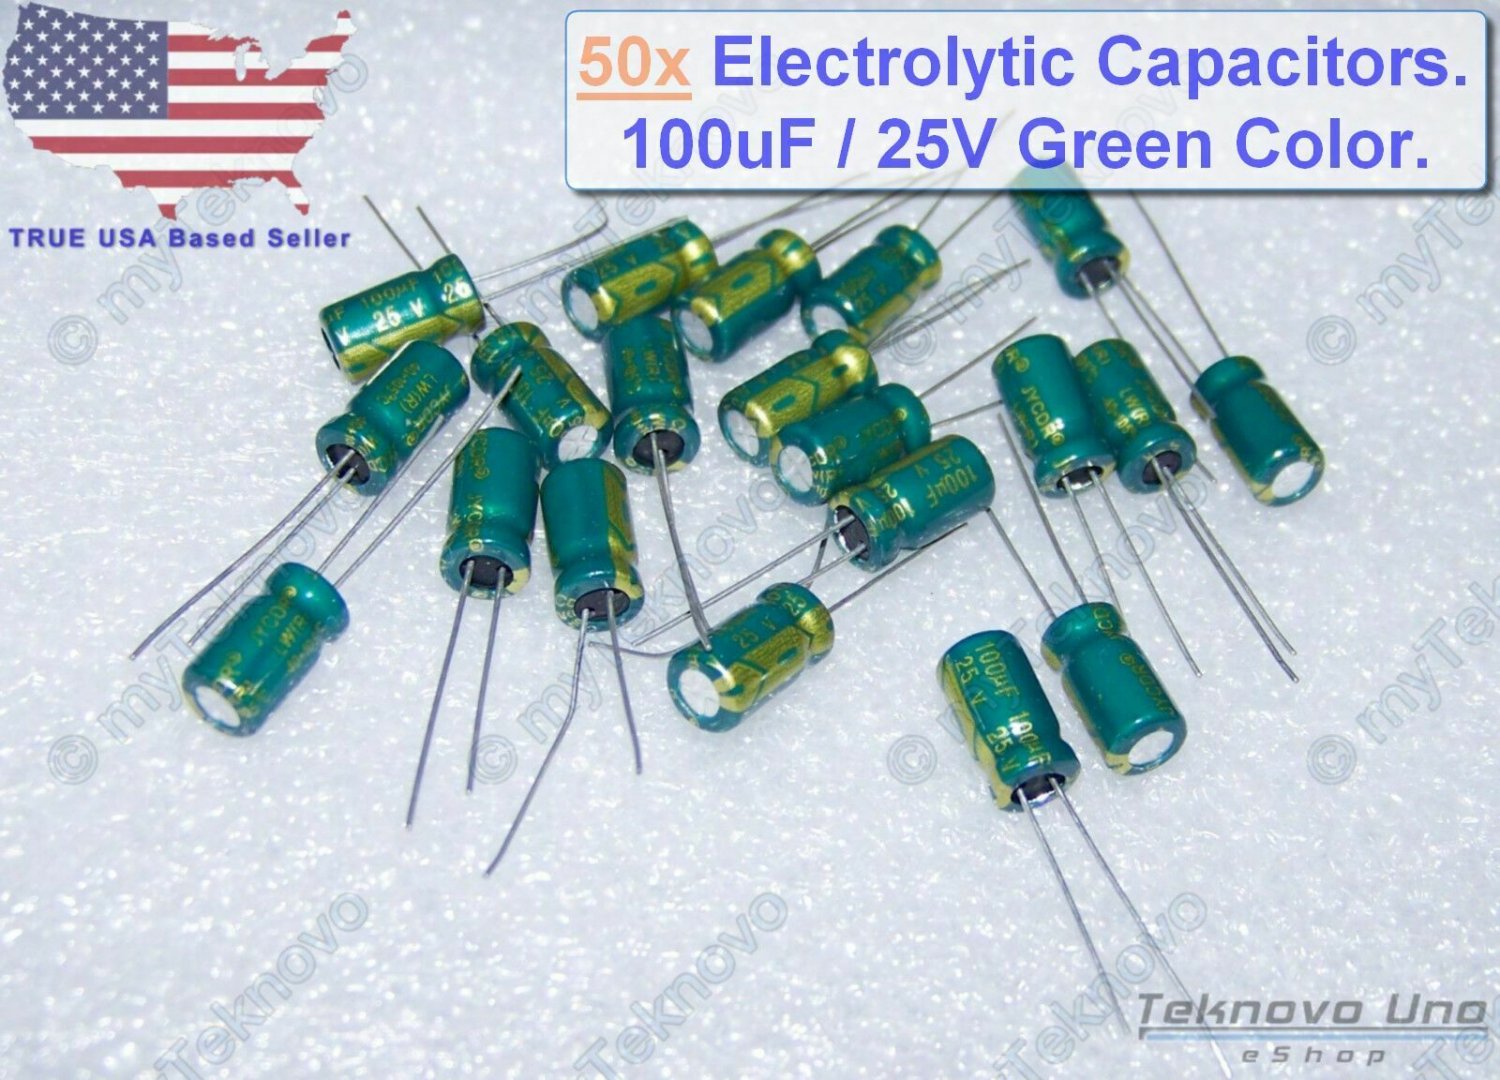 50x Electrolytic Capacitors 100uF 25V 6x7mm GREEN Color 105C RoHS Lead-Free USA